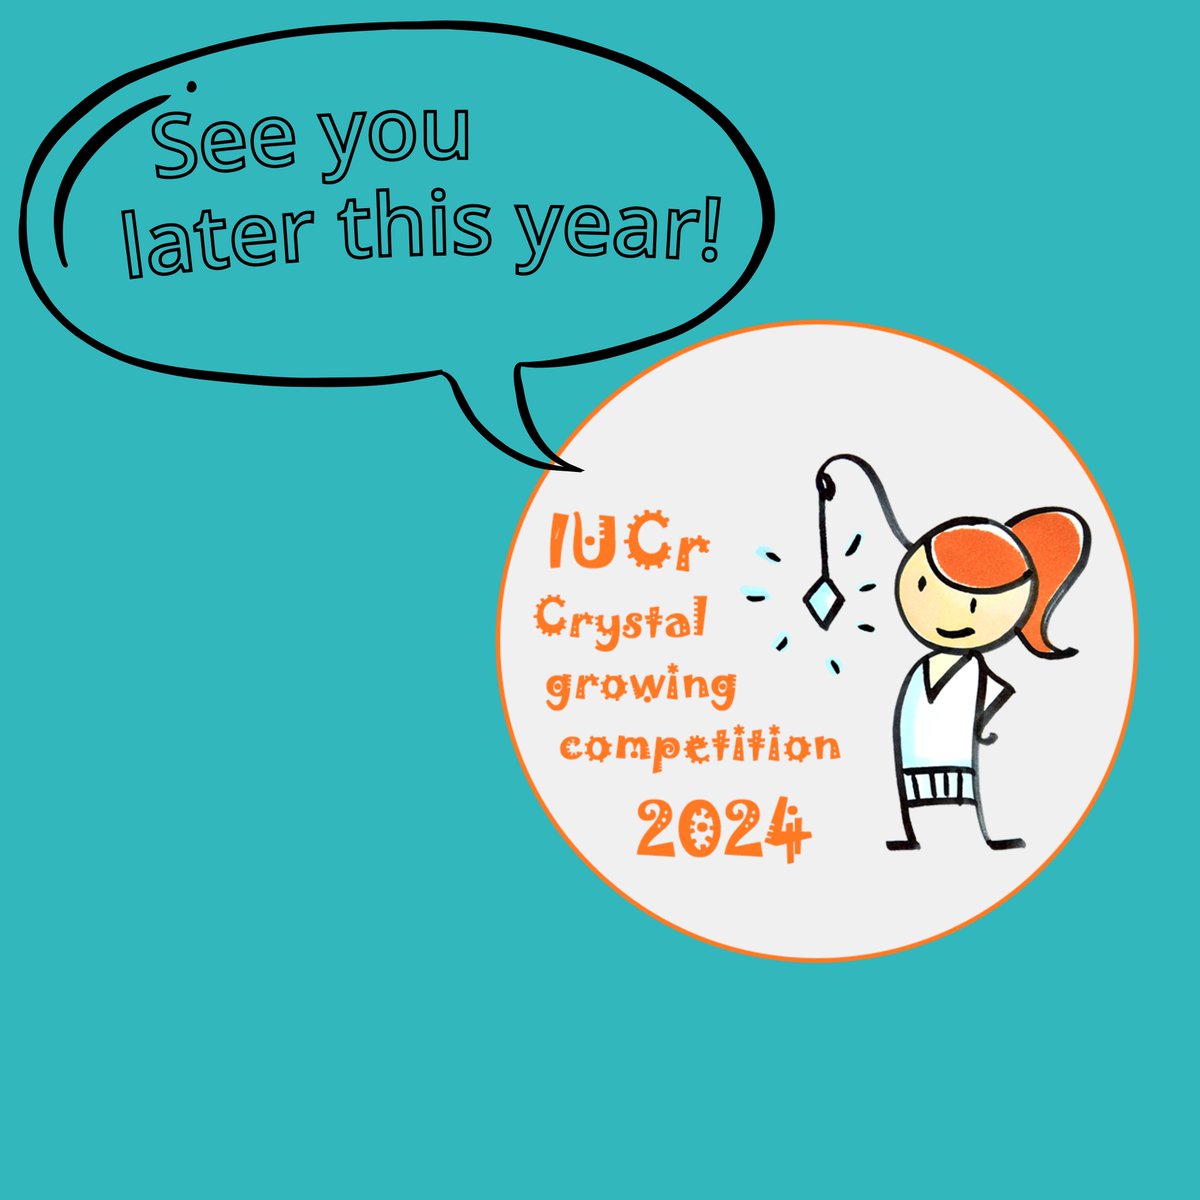 🎉 As #CitizenScienceMonth wraps up, we're sending a huge THANK YOU to all our young citizen scientists! Your incredible entries in the IUCr Crystal Growing Competition 2023 truly sparkled! We can't wait to see what you'll grow this year! Want to join in? iucr.org/outreach/cryst…